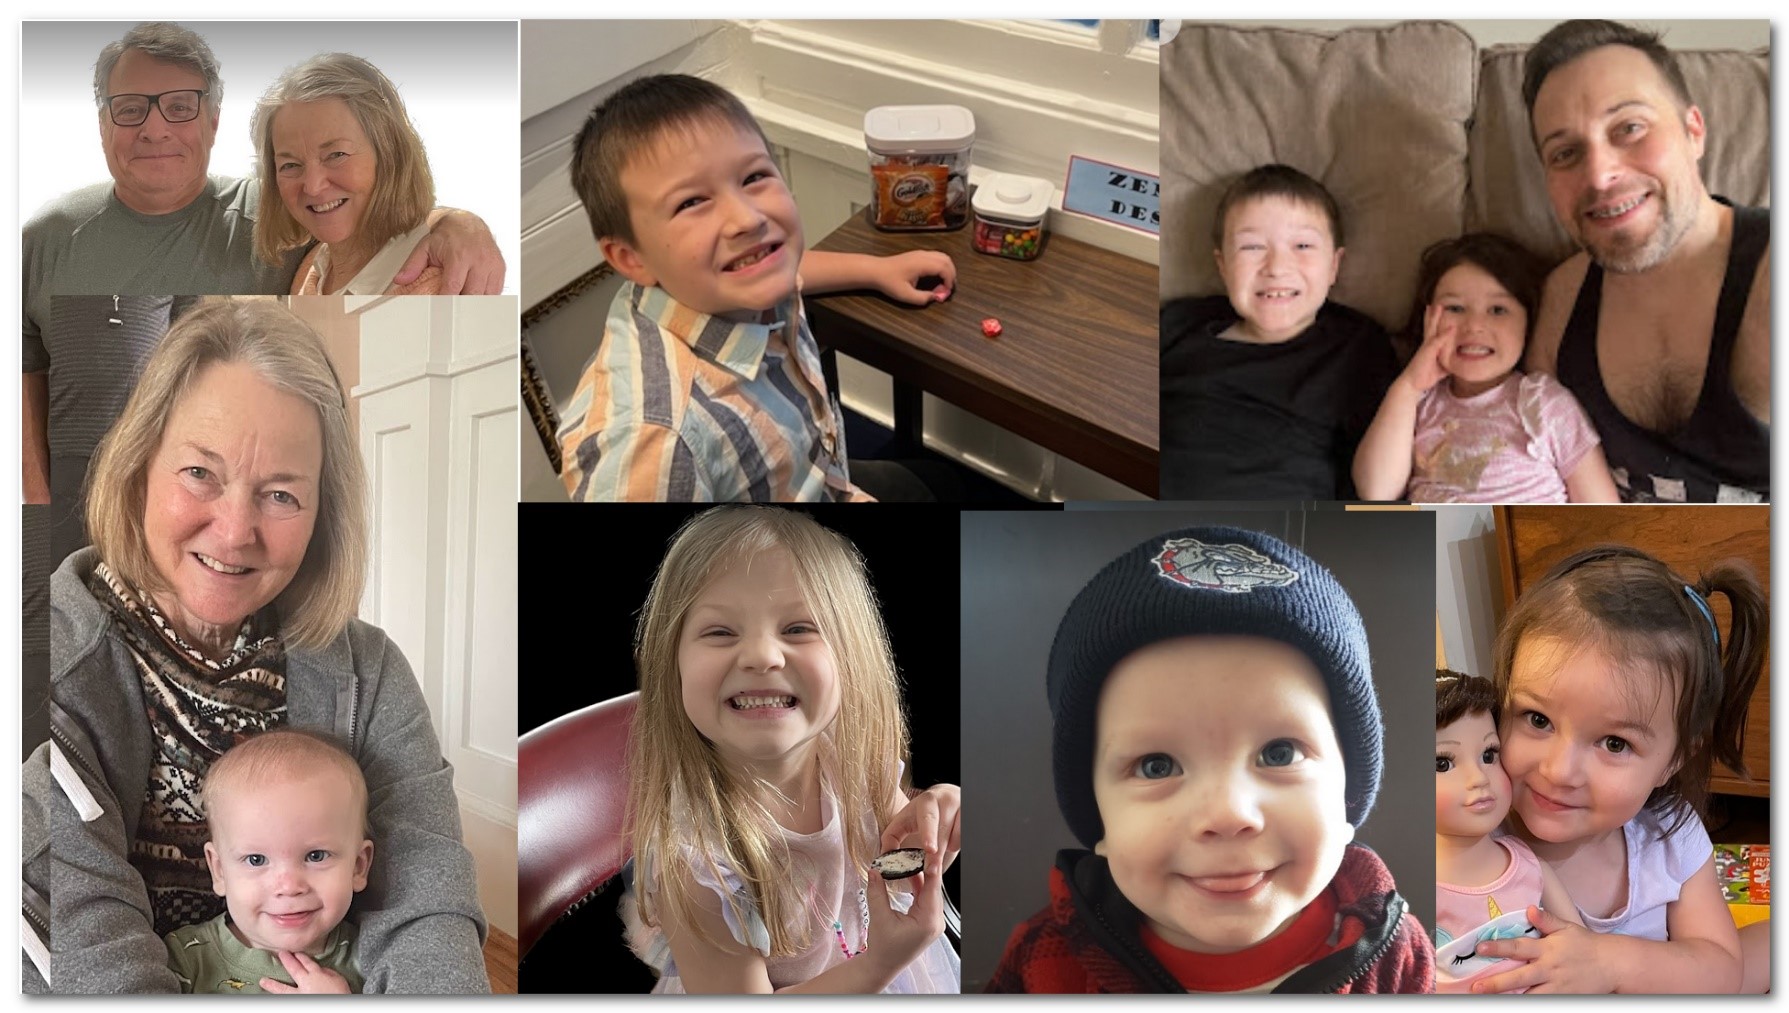 A collage of pictures featuring Shawn Wright and his family. This includes pictures of his wife, son and four grandchildren all smiling for the camera.